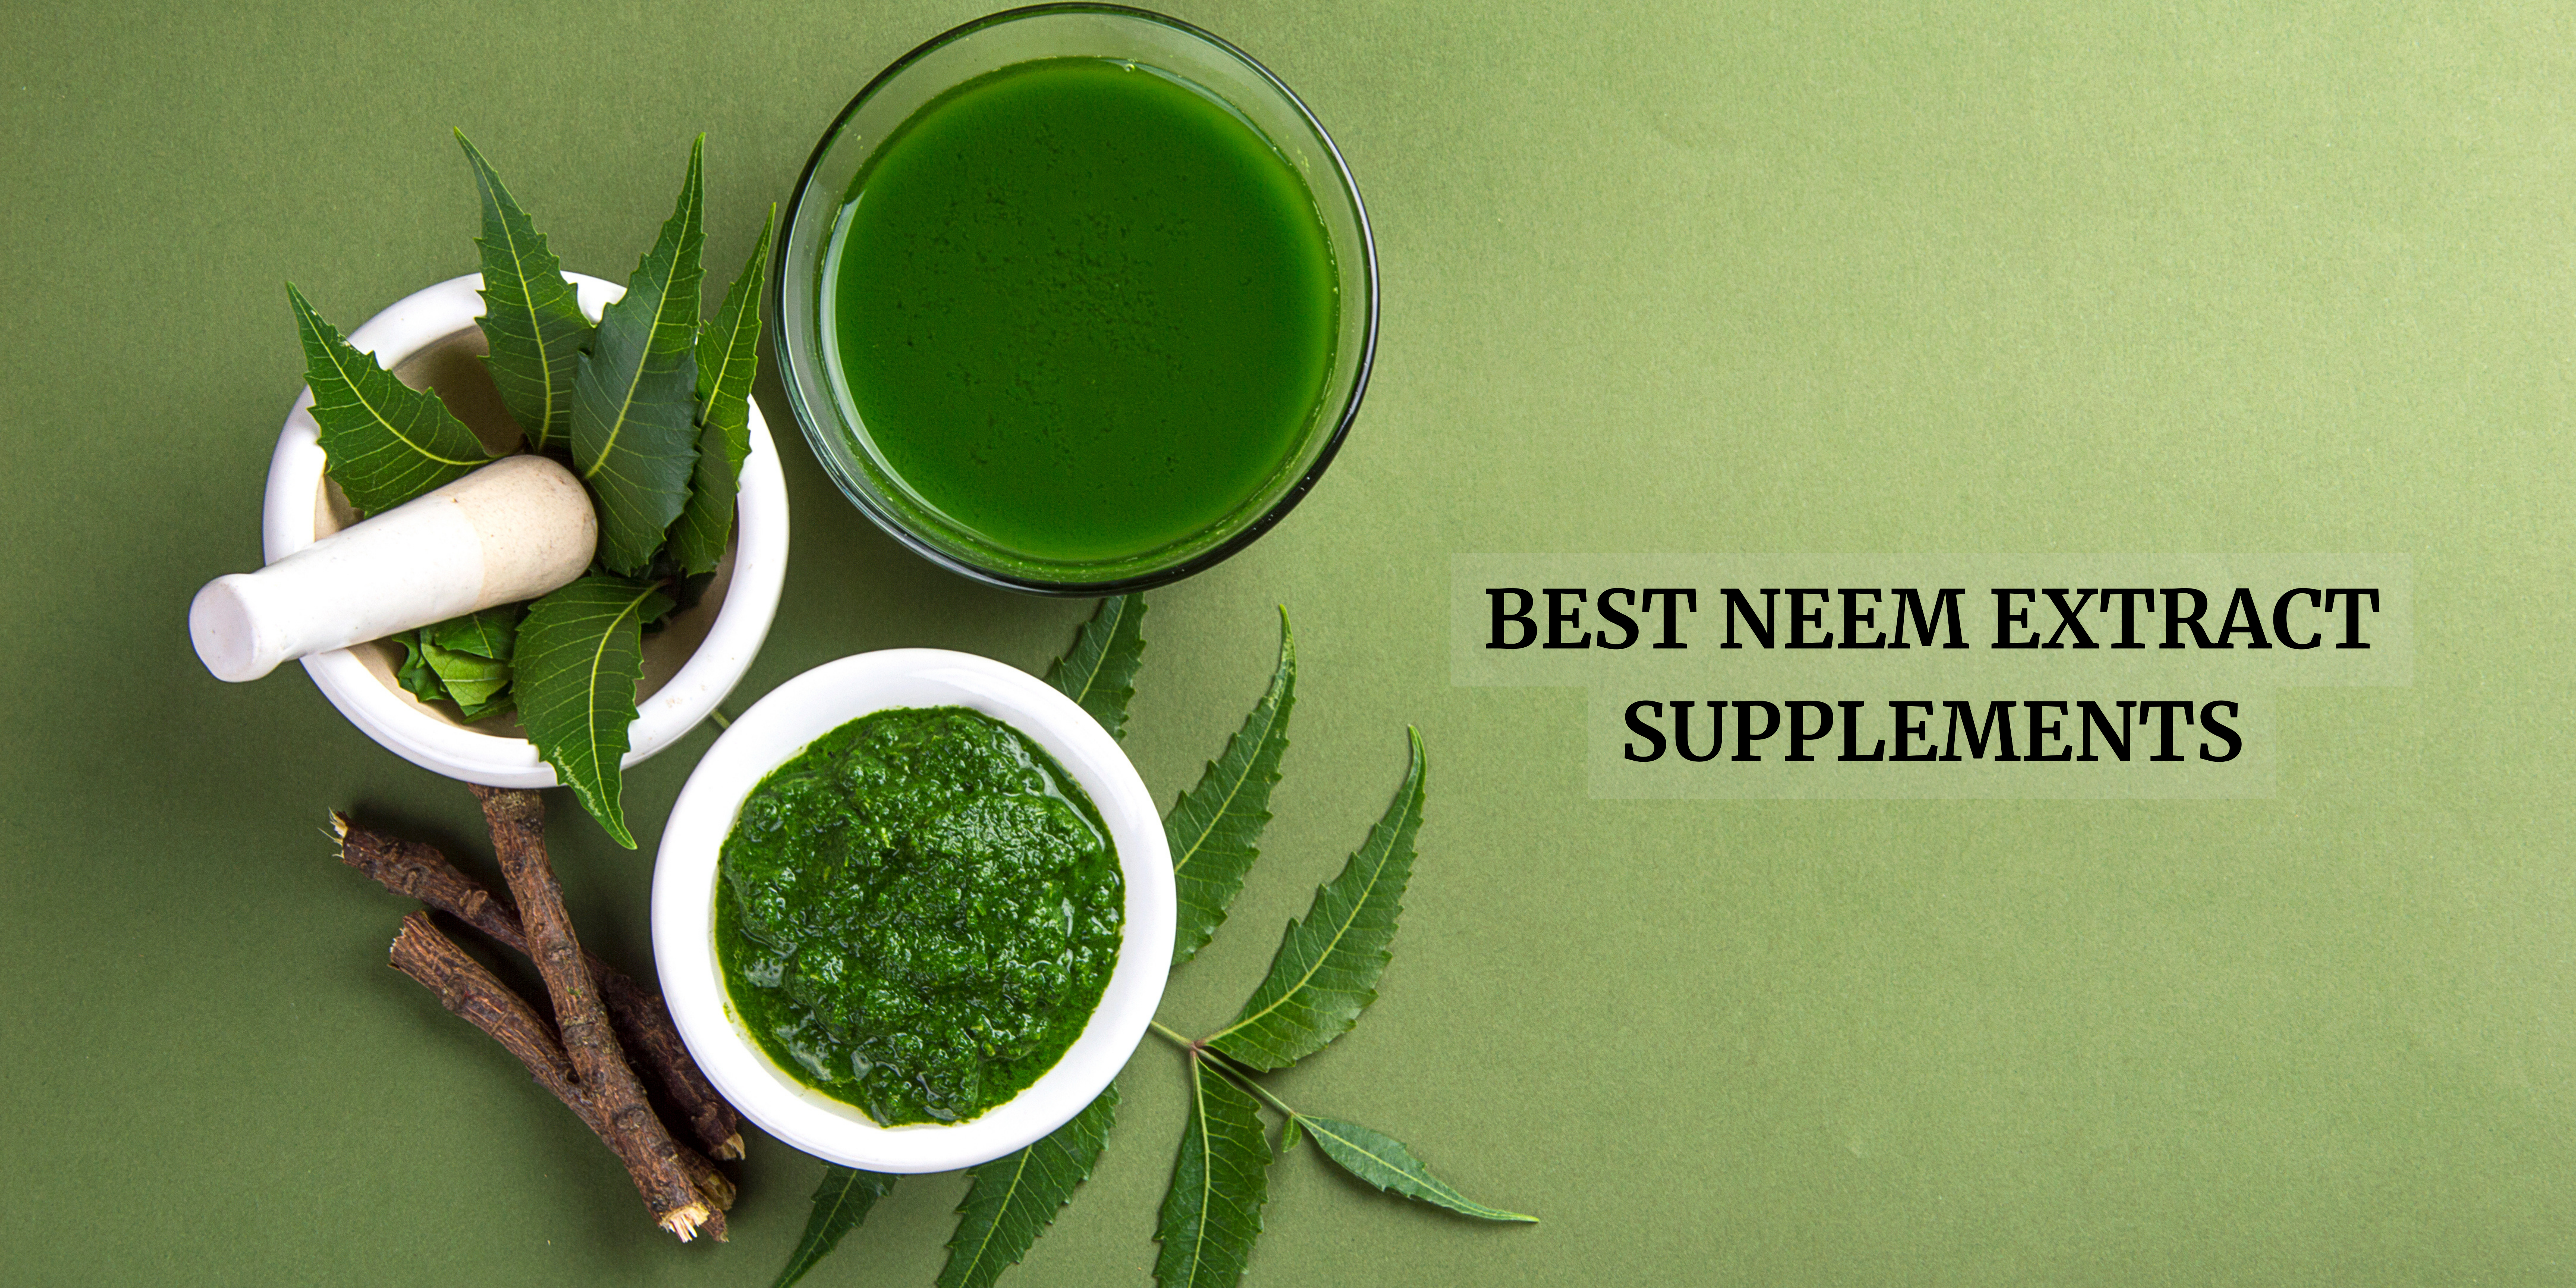 neem extract supplements in the World